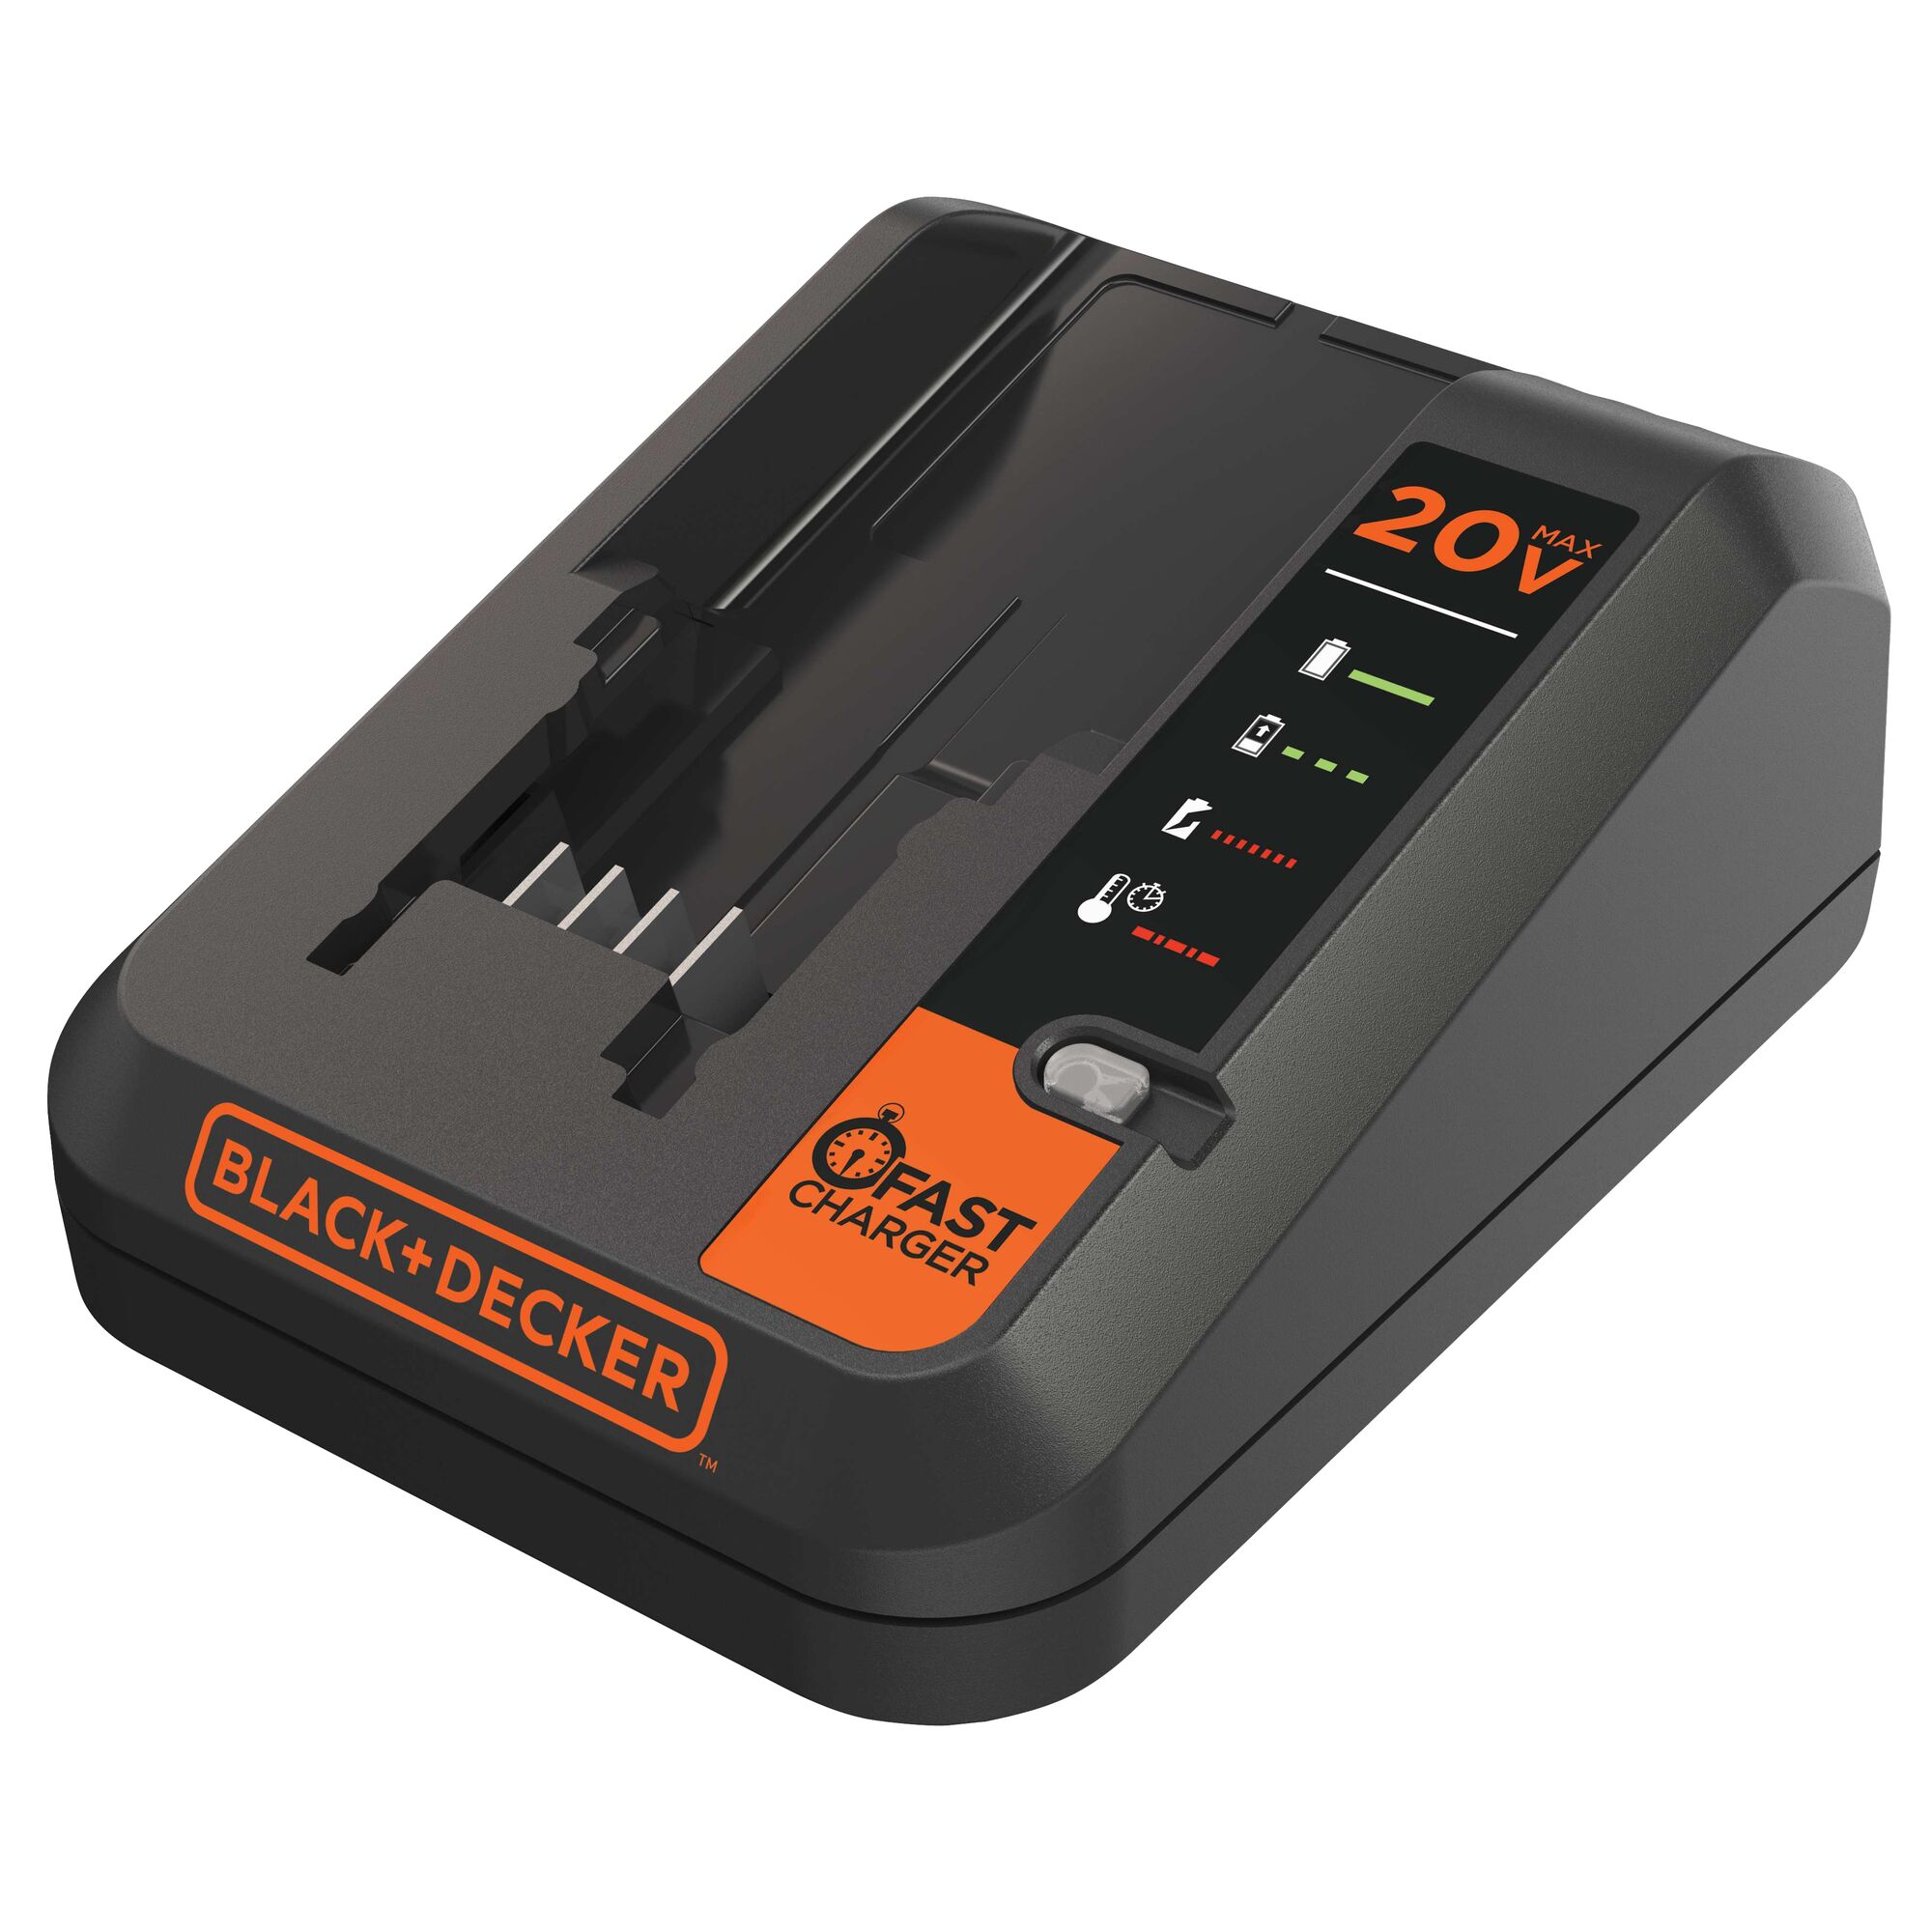 Right profile of black and decker lithium fast charger.